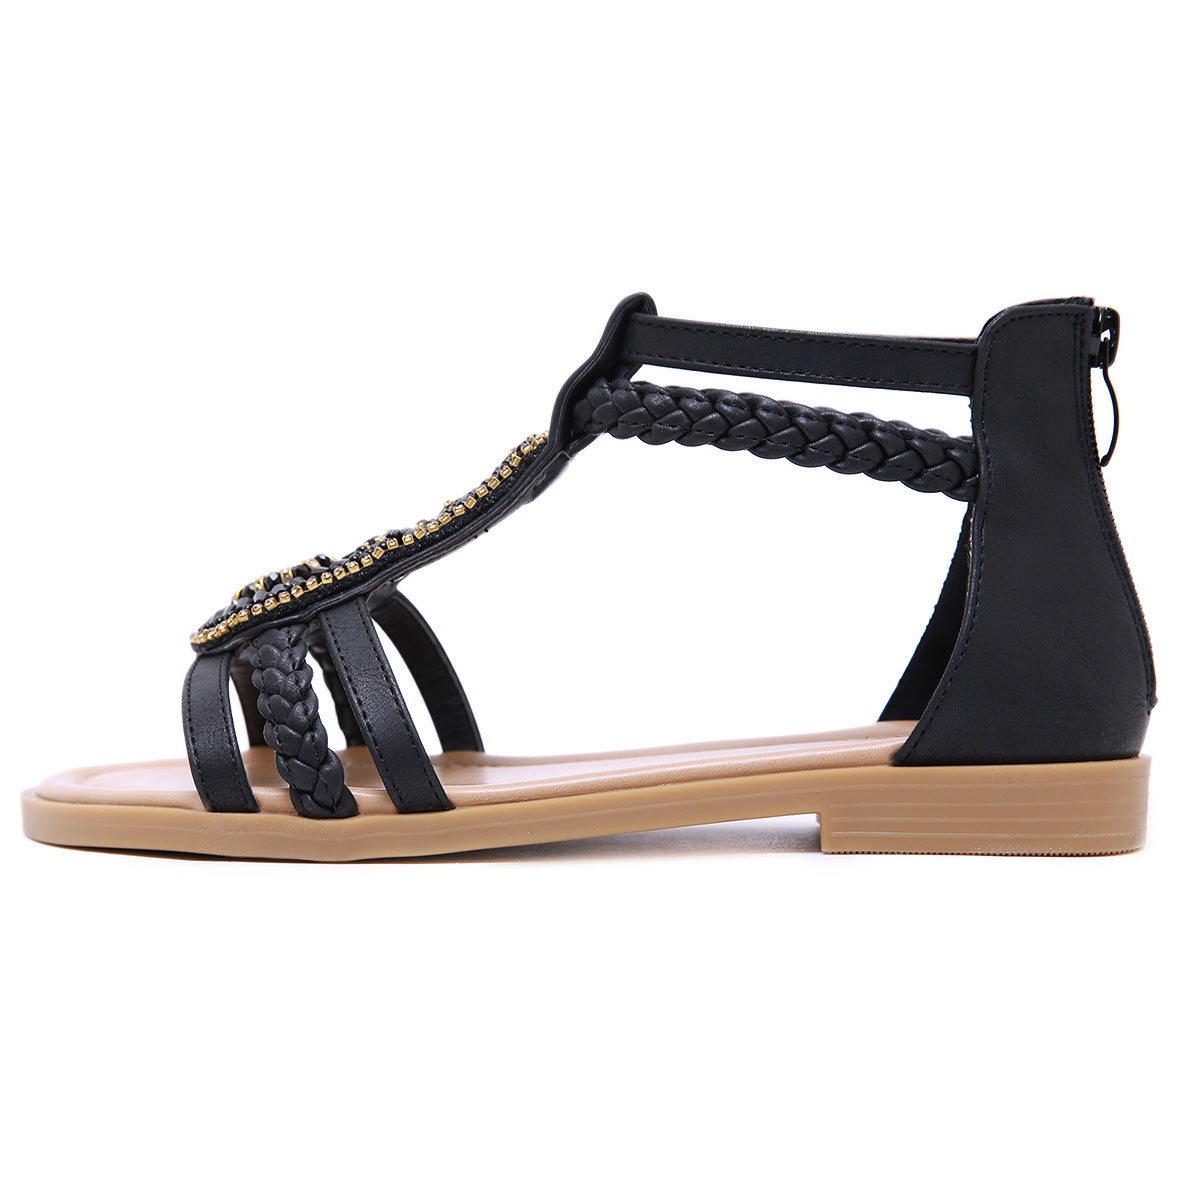 Flat Gladiator Sandals With Beads